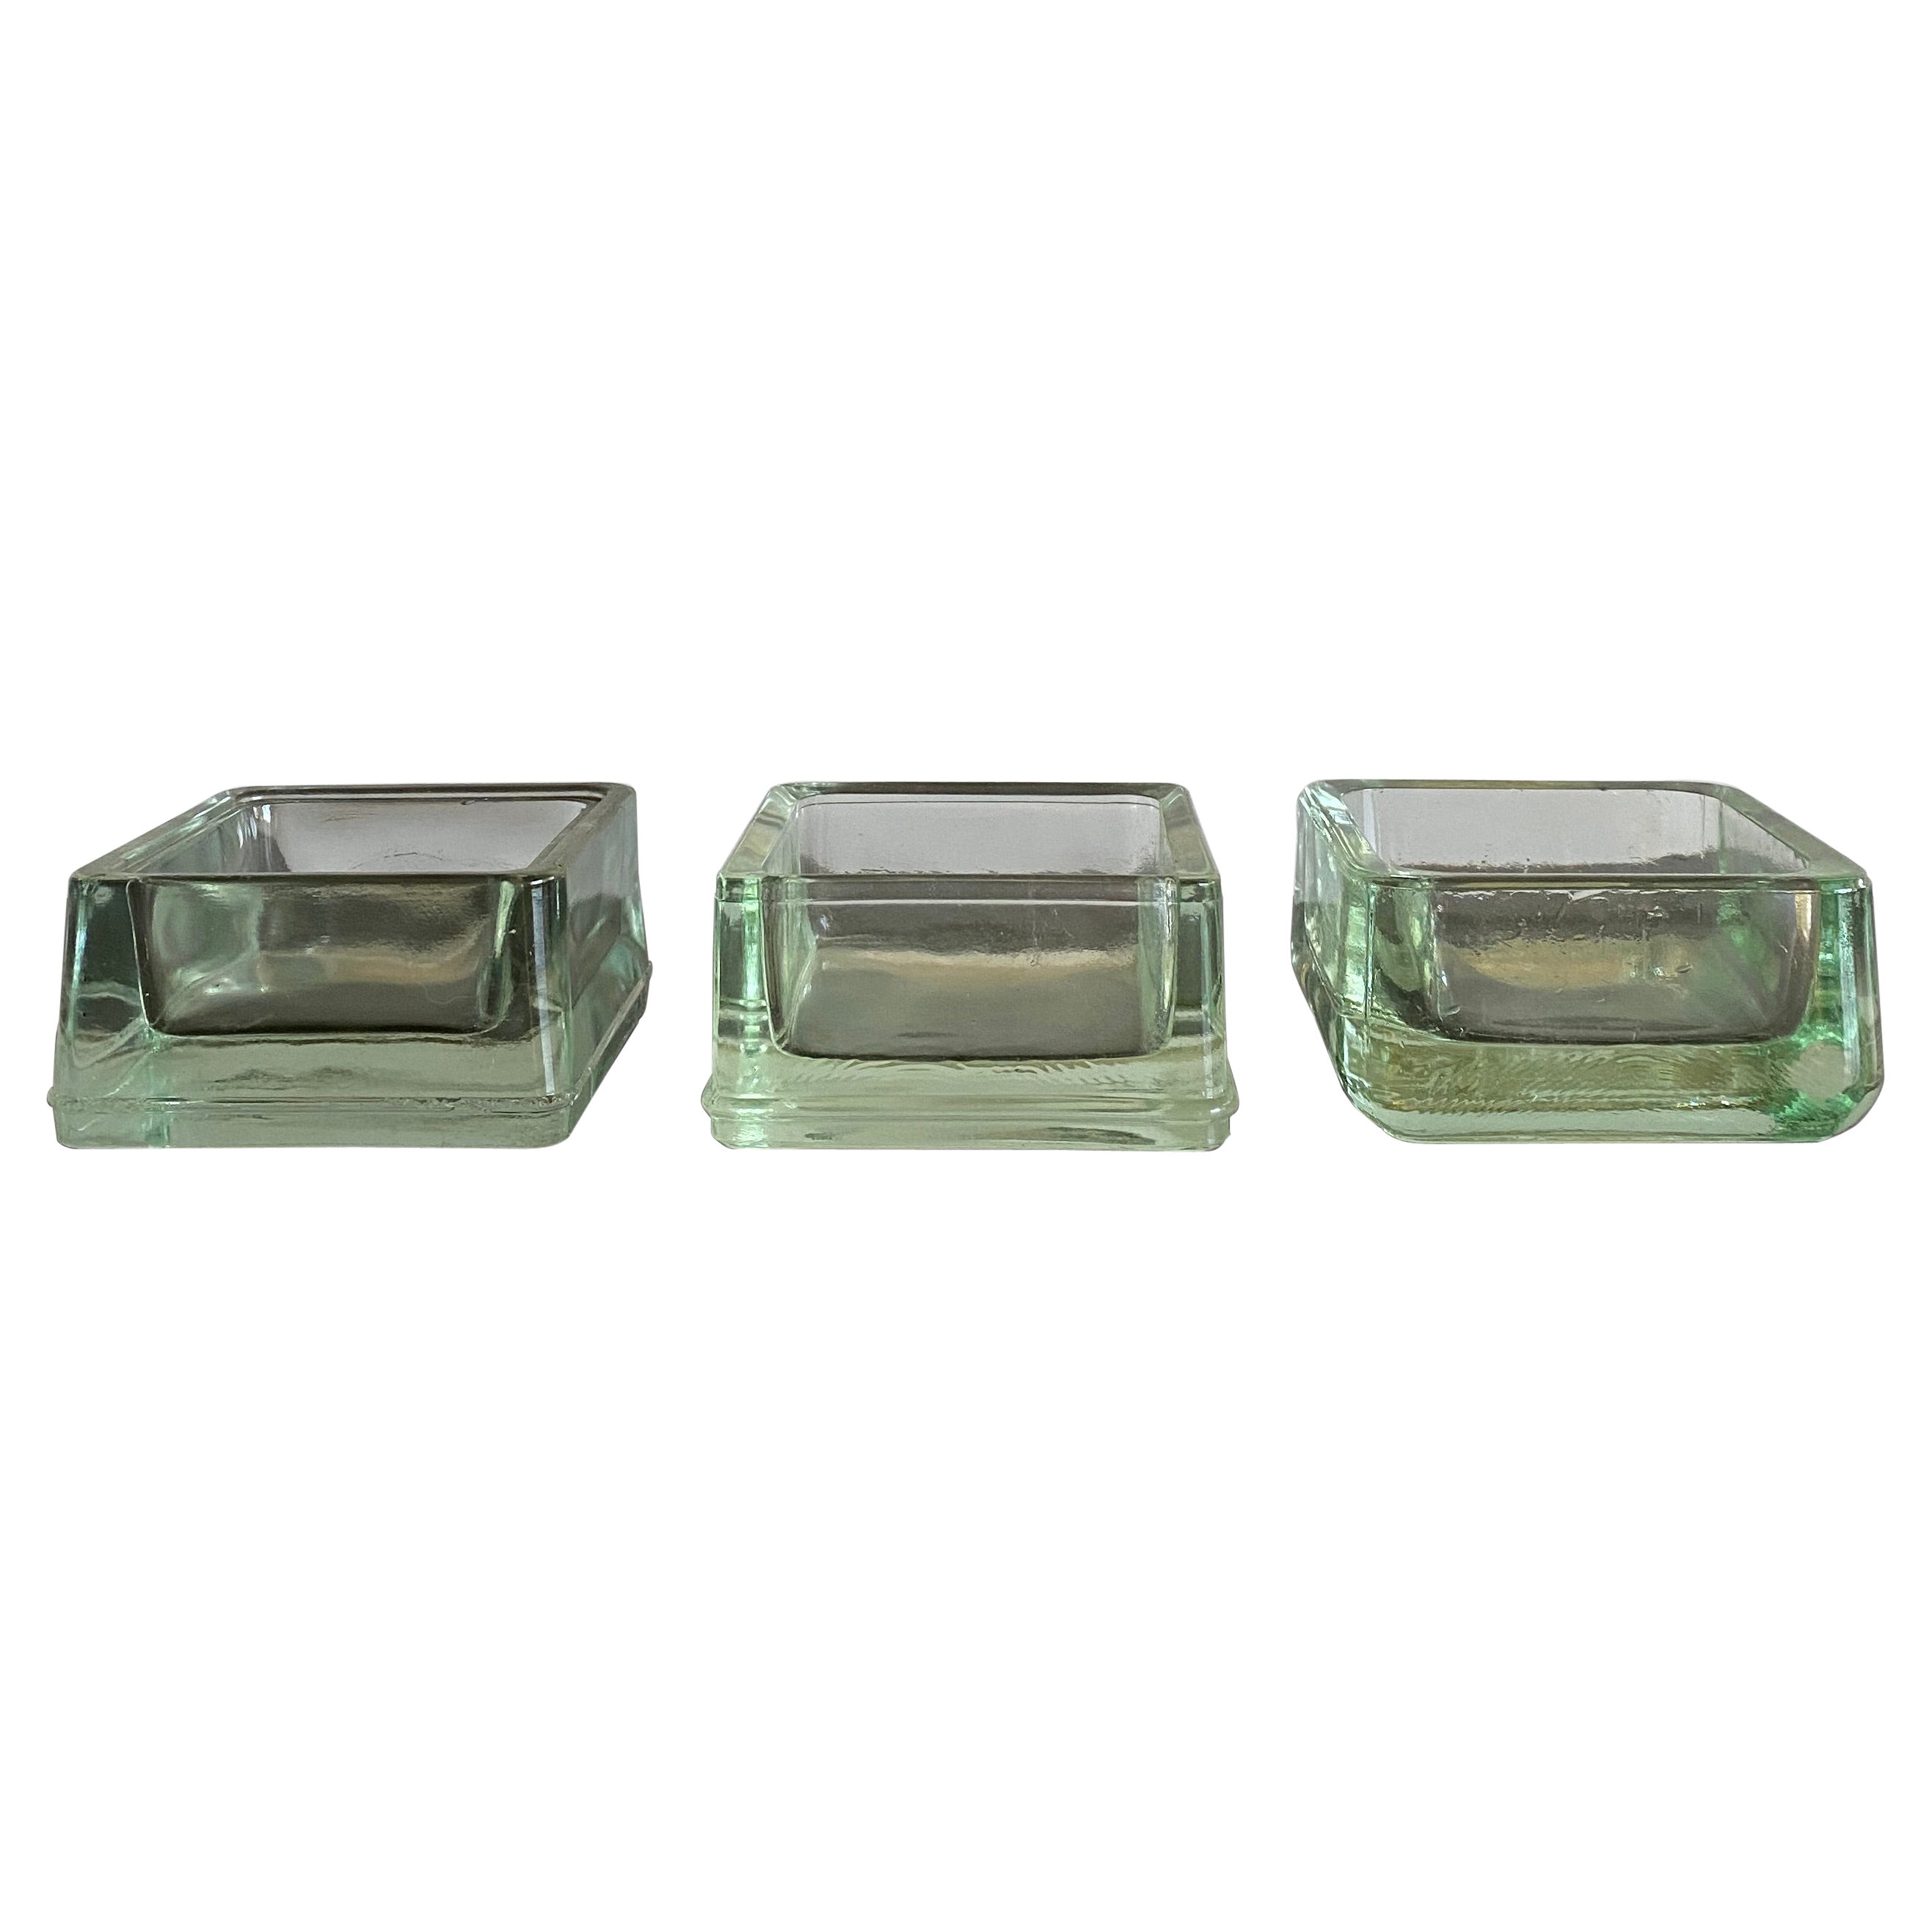 Lumax Set of 3 Moulded Green Glass Bowls, France, 1960s For Sale